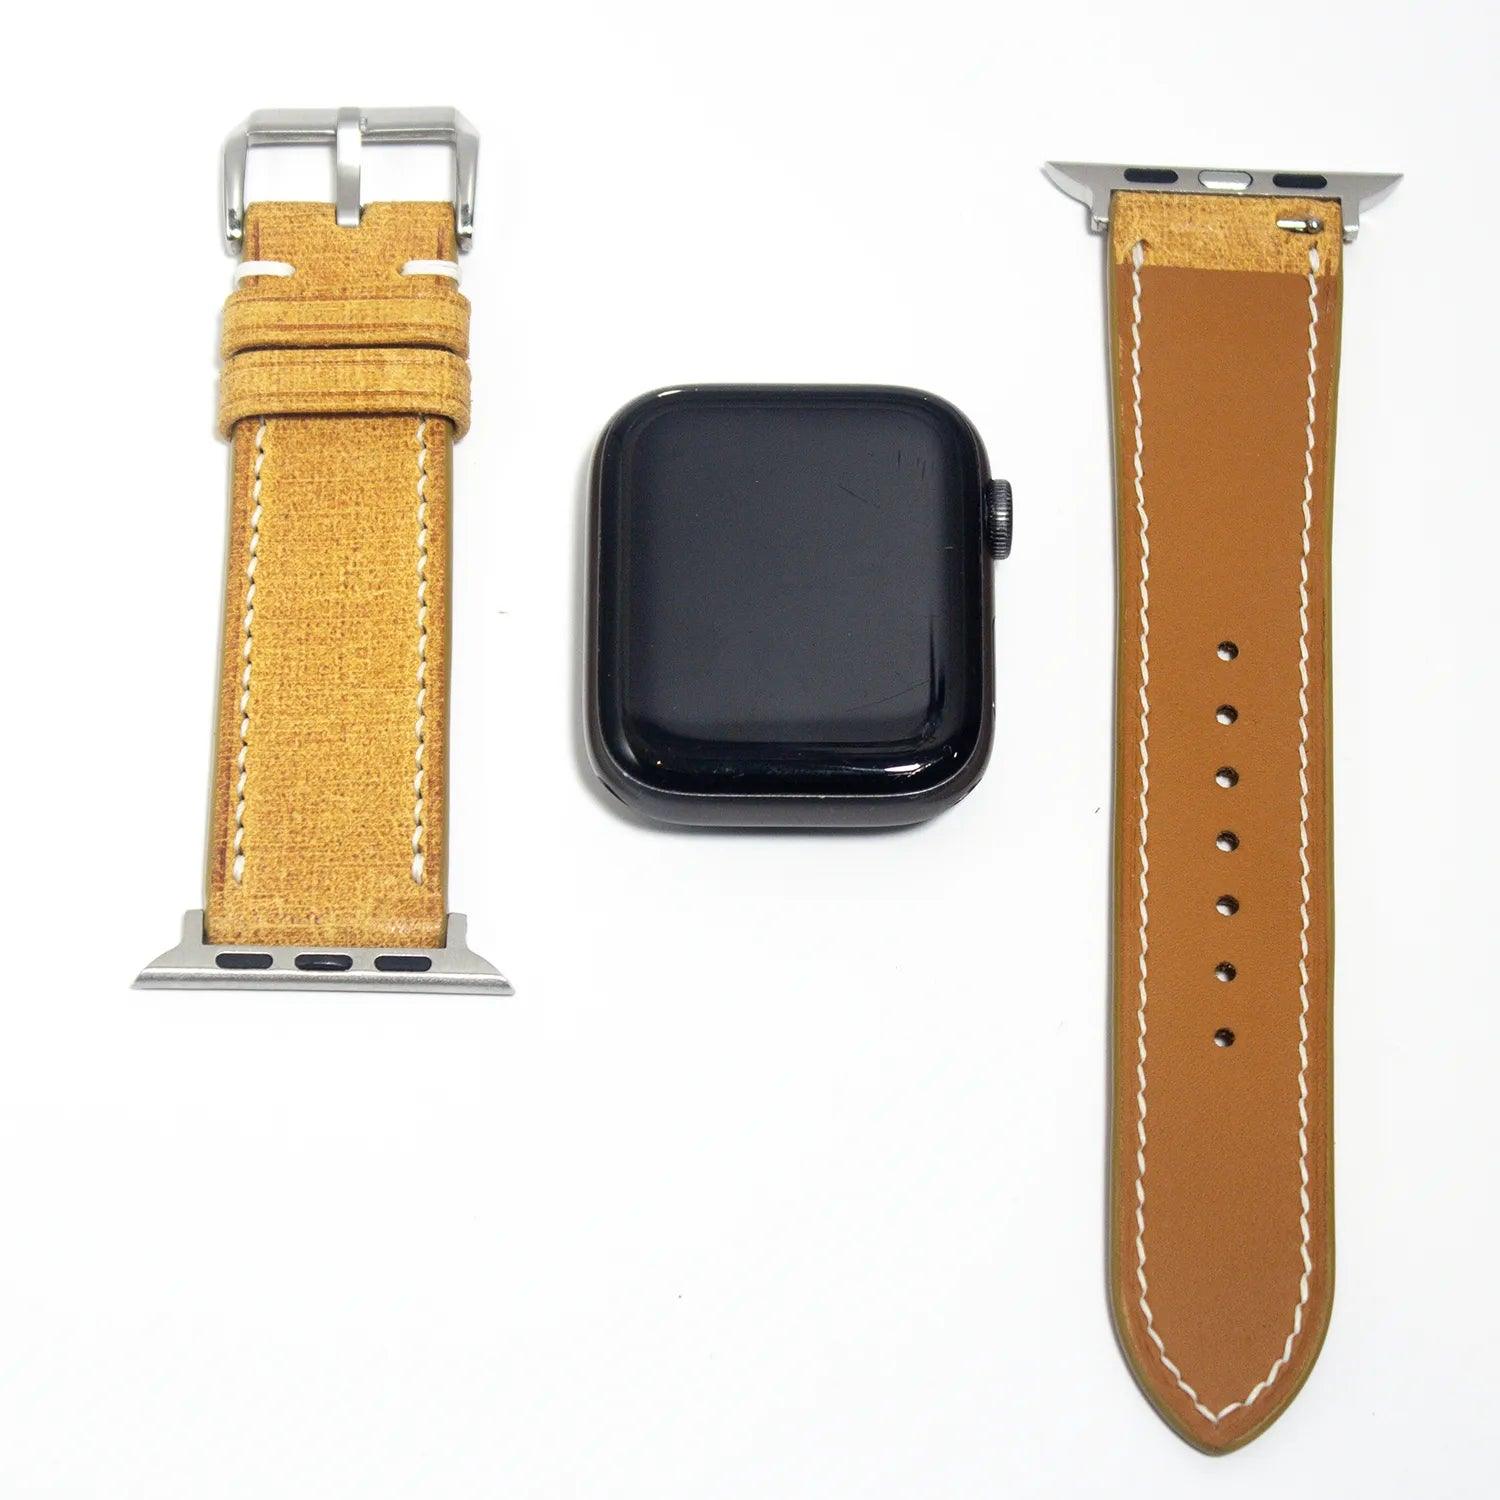 Durable leather watch straps in bright yellow Babele leather, combining functionality with stylish flair.